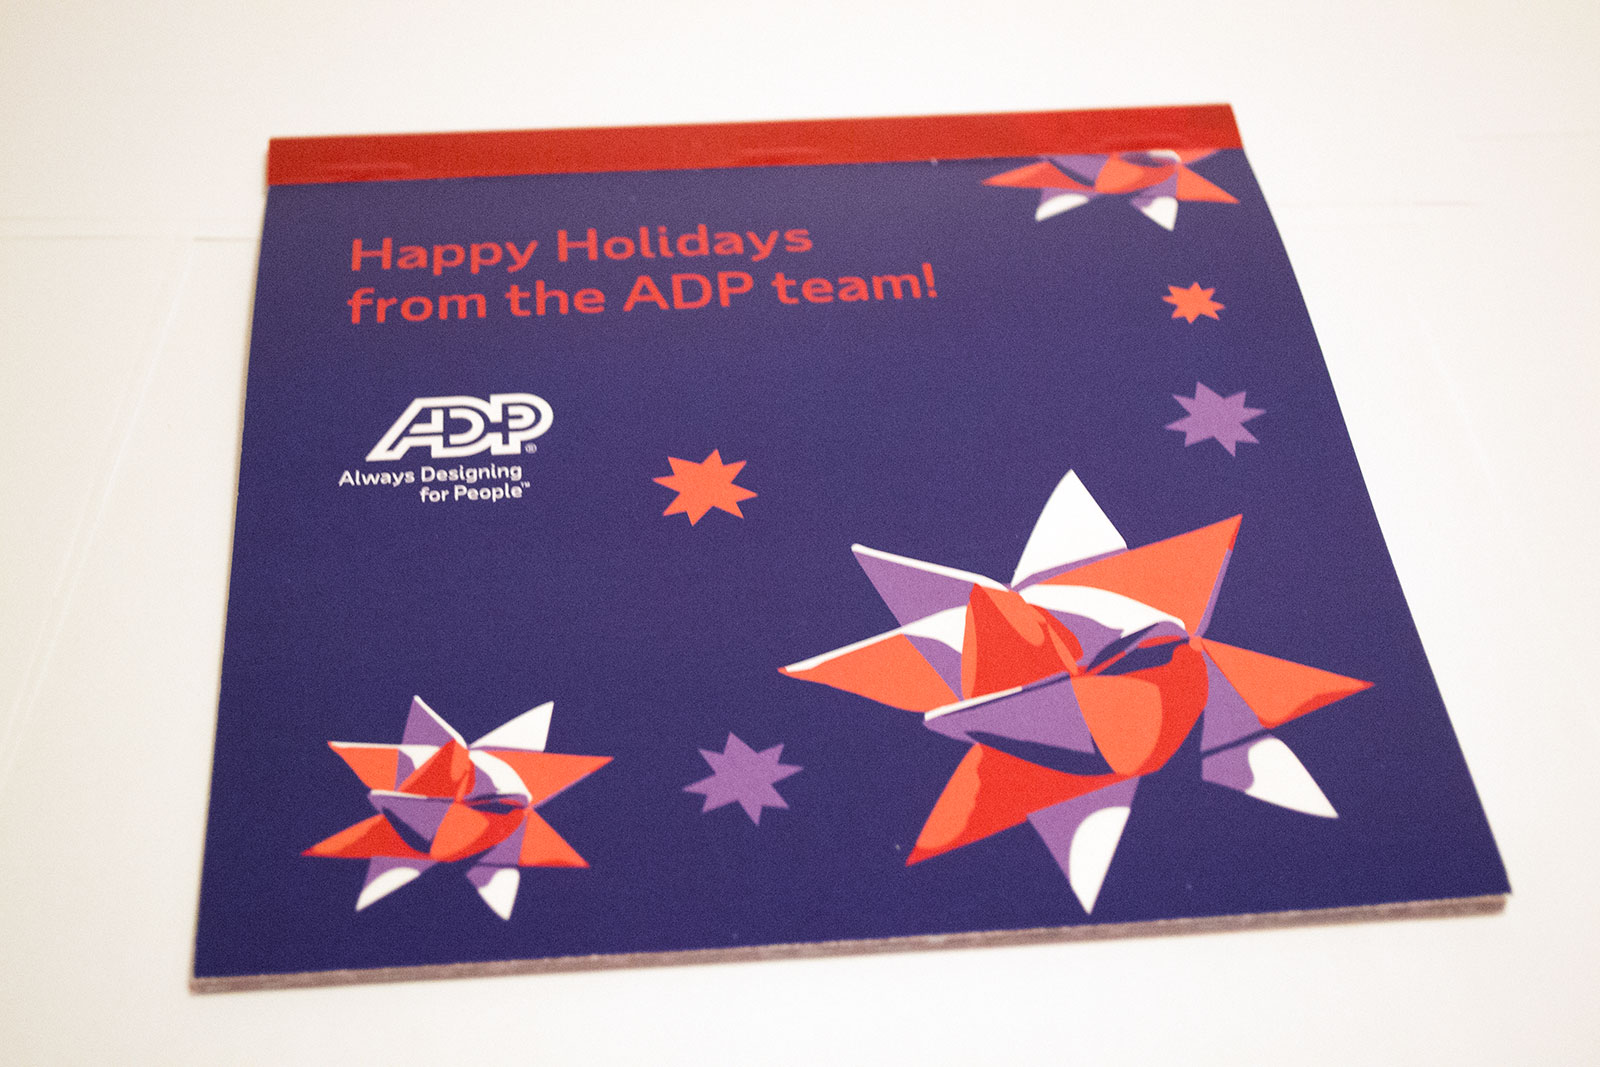 Origami book 3 Happy Holidays from the ADP team! with the ADP Always designing for people logo underneath